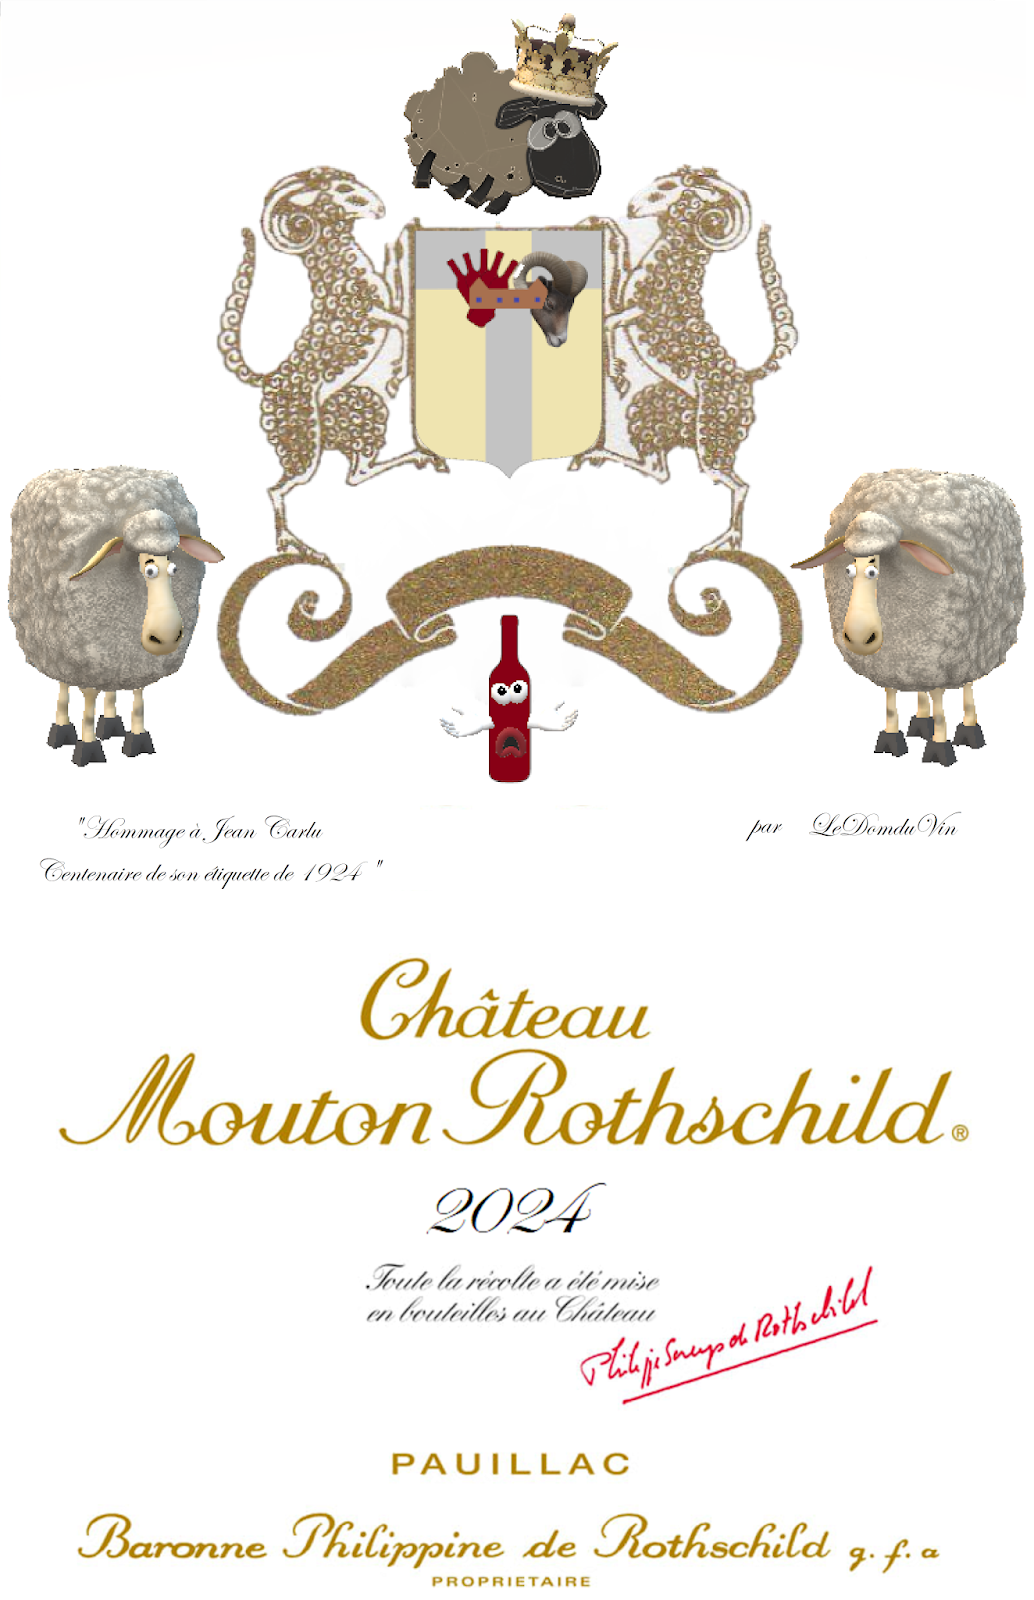 LeDomduVin: LeDomduVin: Wine Bottle Weight, Shape, Glass and Label Design  Changes Over Time (Part 2): Chateau Mouton Rothschild